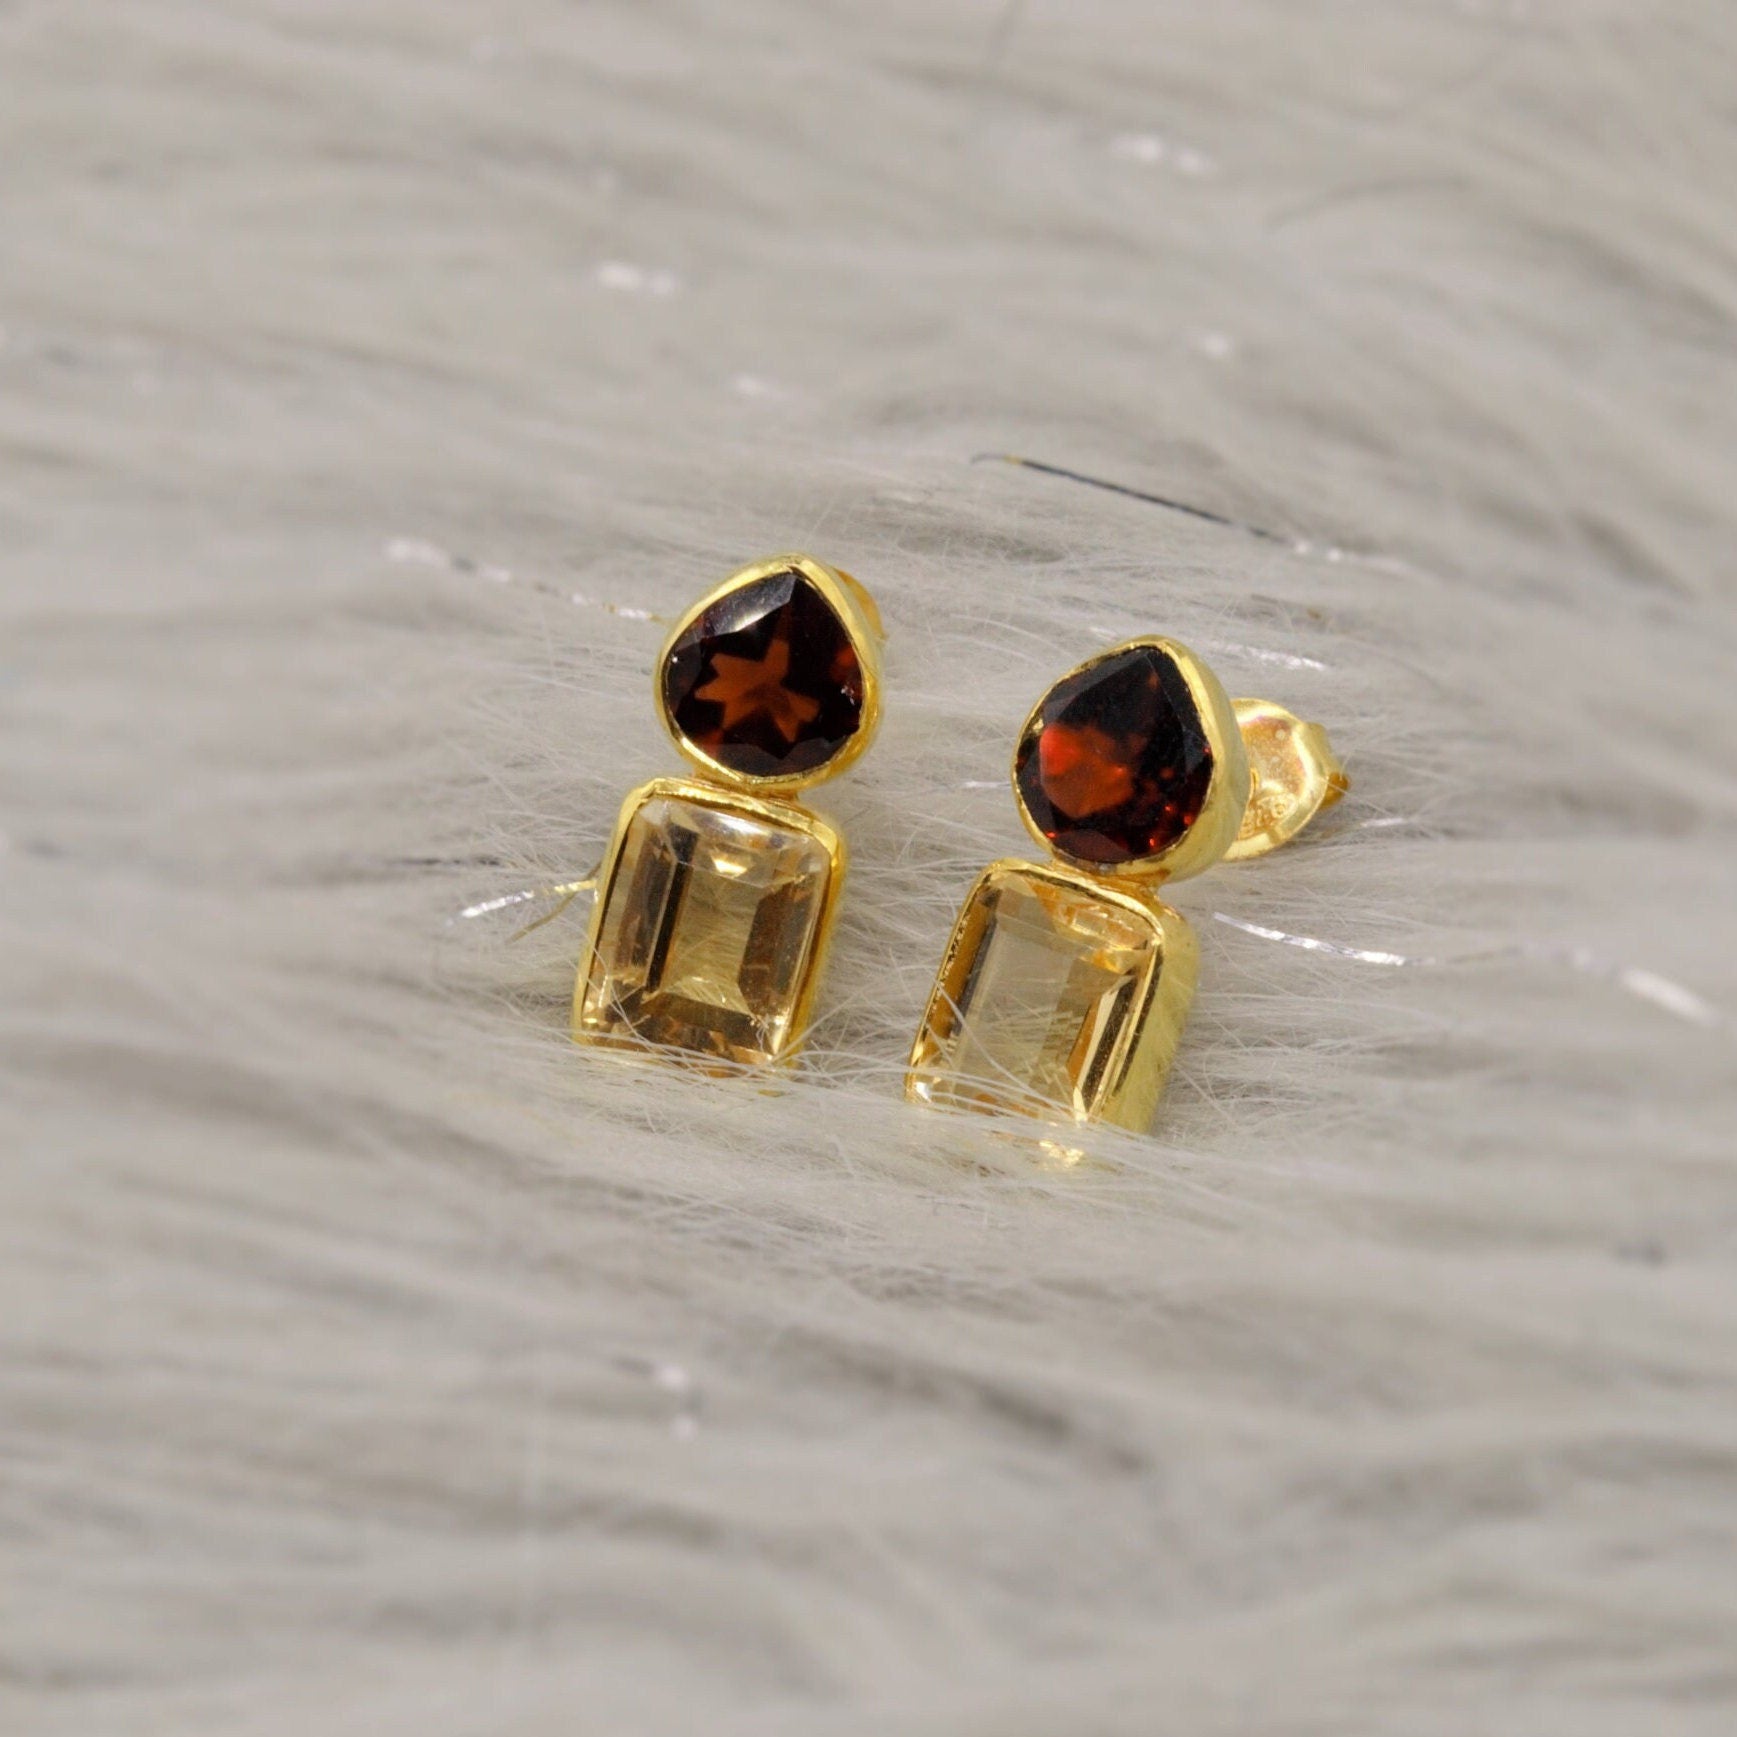 Garnet Citrine Gold Stud Earrings, Unique Gold Plated Sterling Silver Earrings, January, November Birthstone, Birthday Gifts For Her